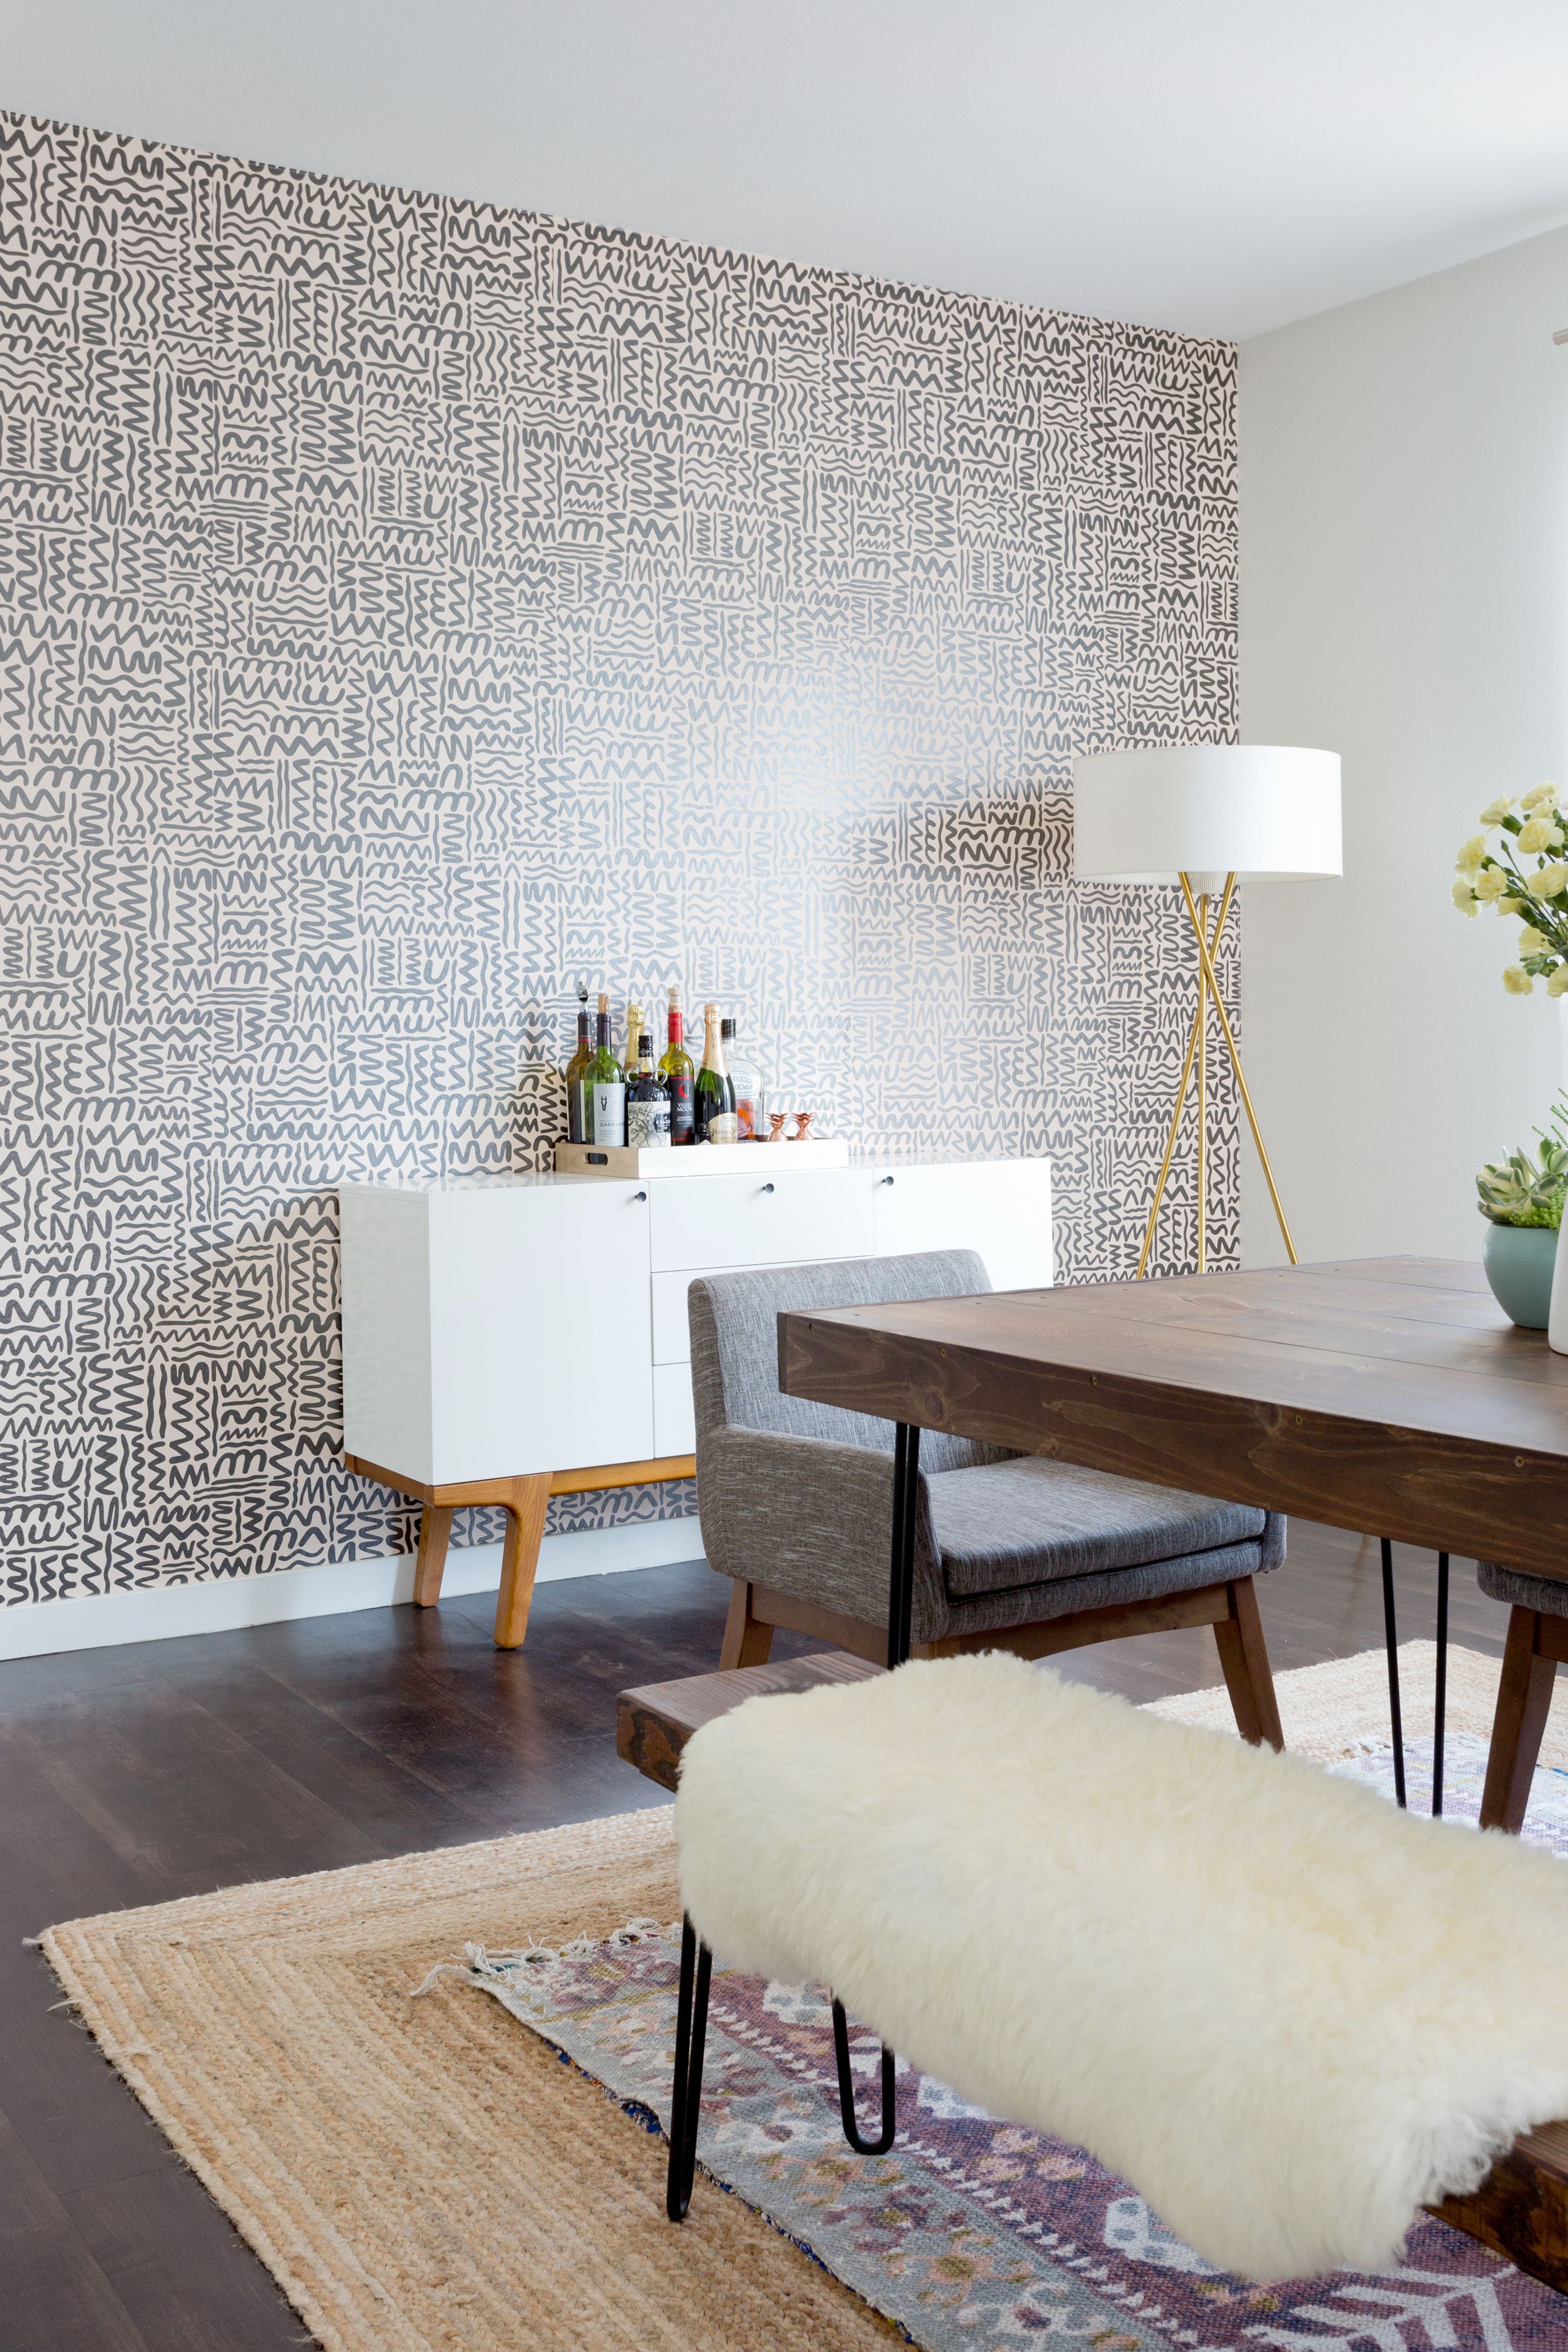 A dining room with a wallpaper accent wall and layered rugs